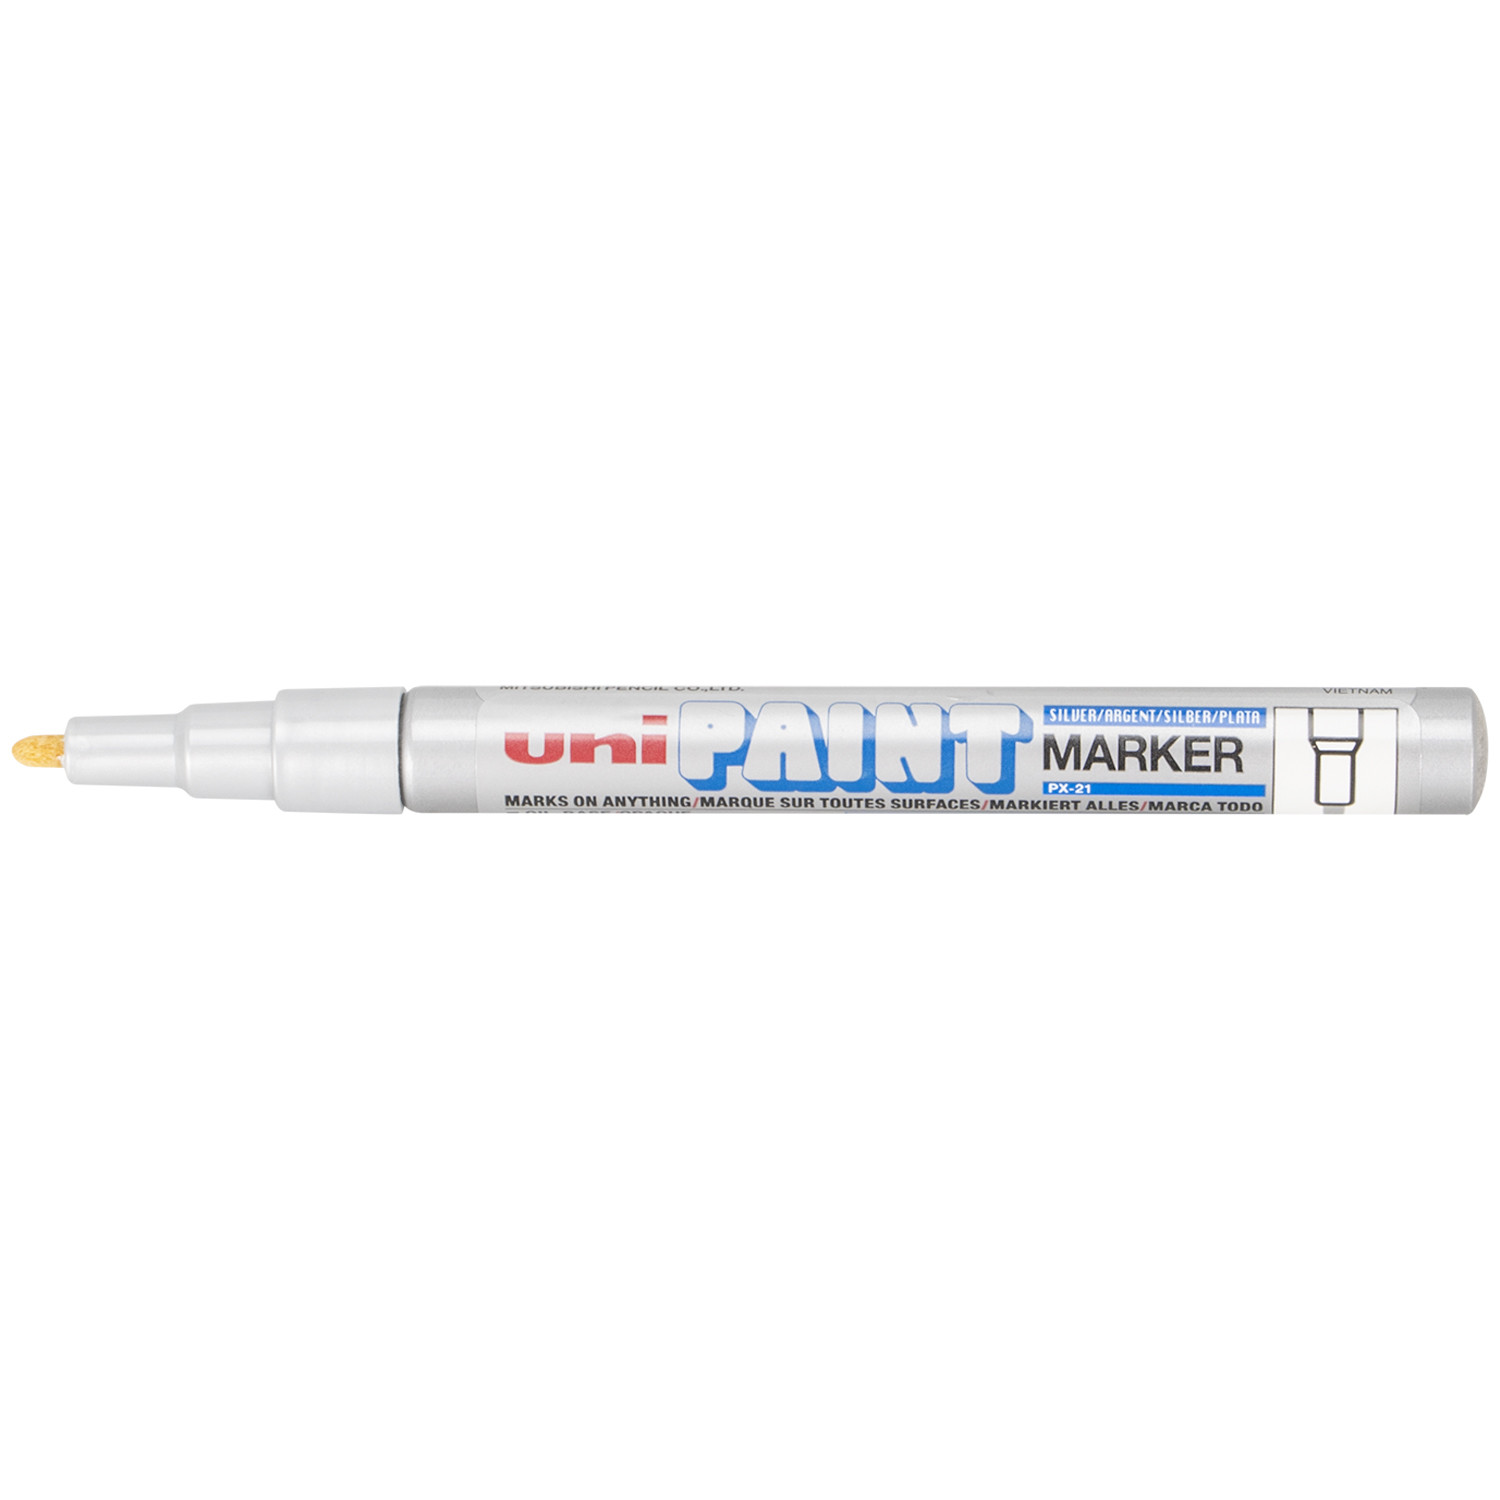 Uniball Paint Marker Pen PX-21 Silver - Silver Image 2